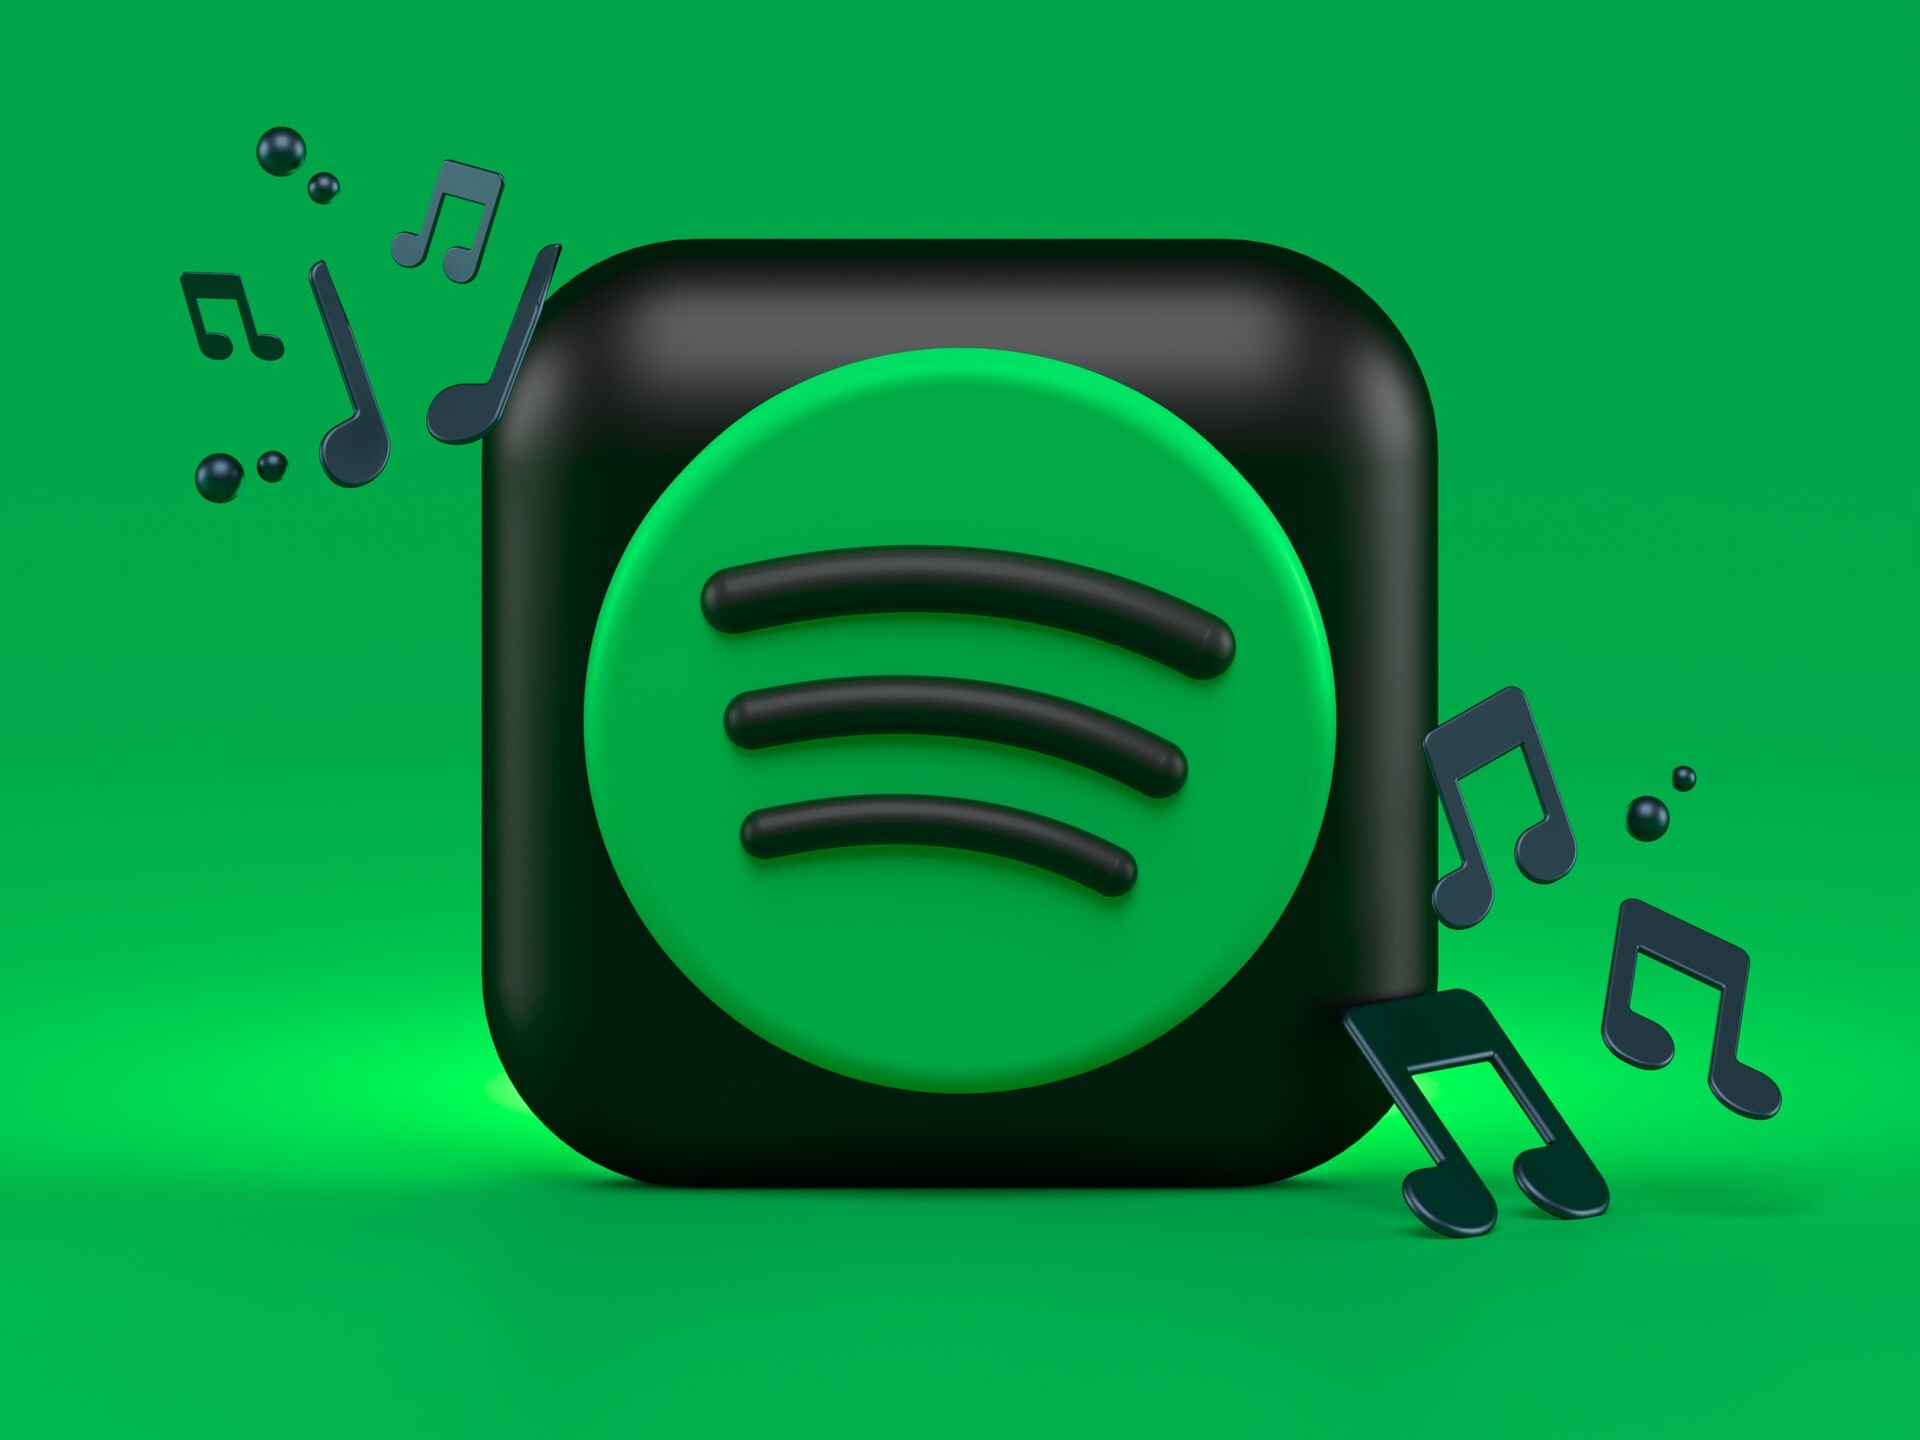 how to remove followers on spotify